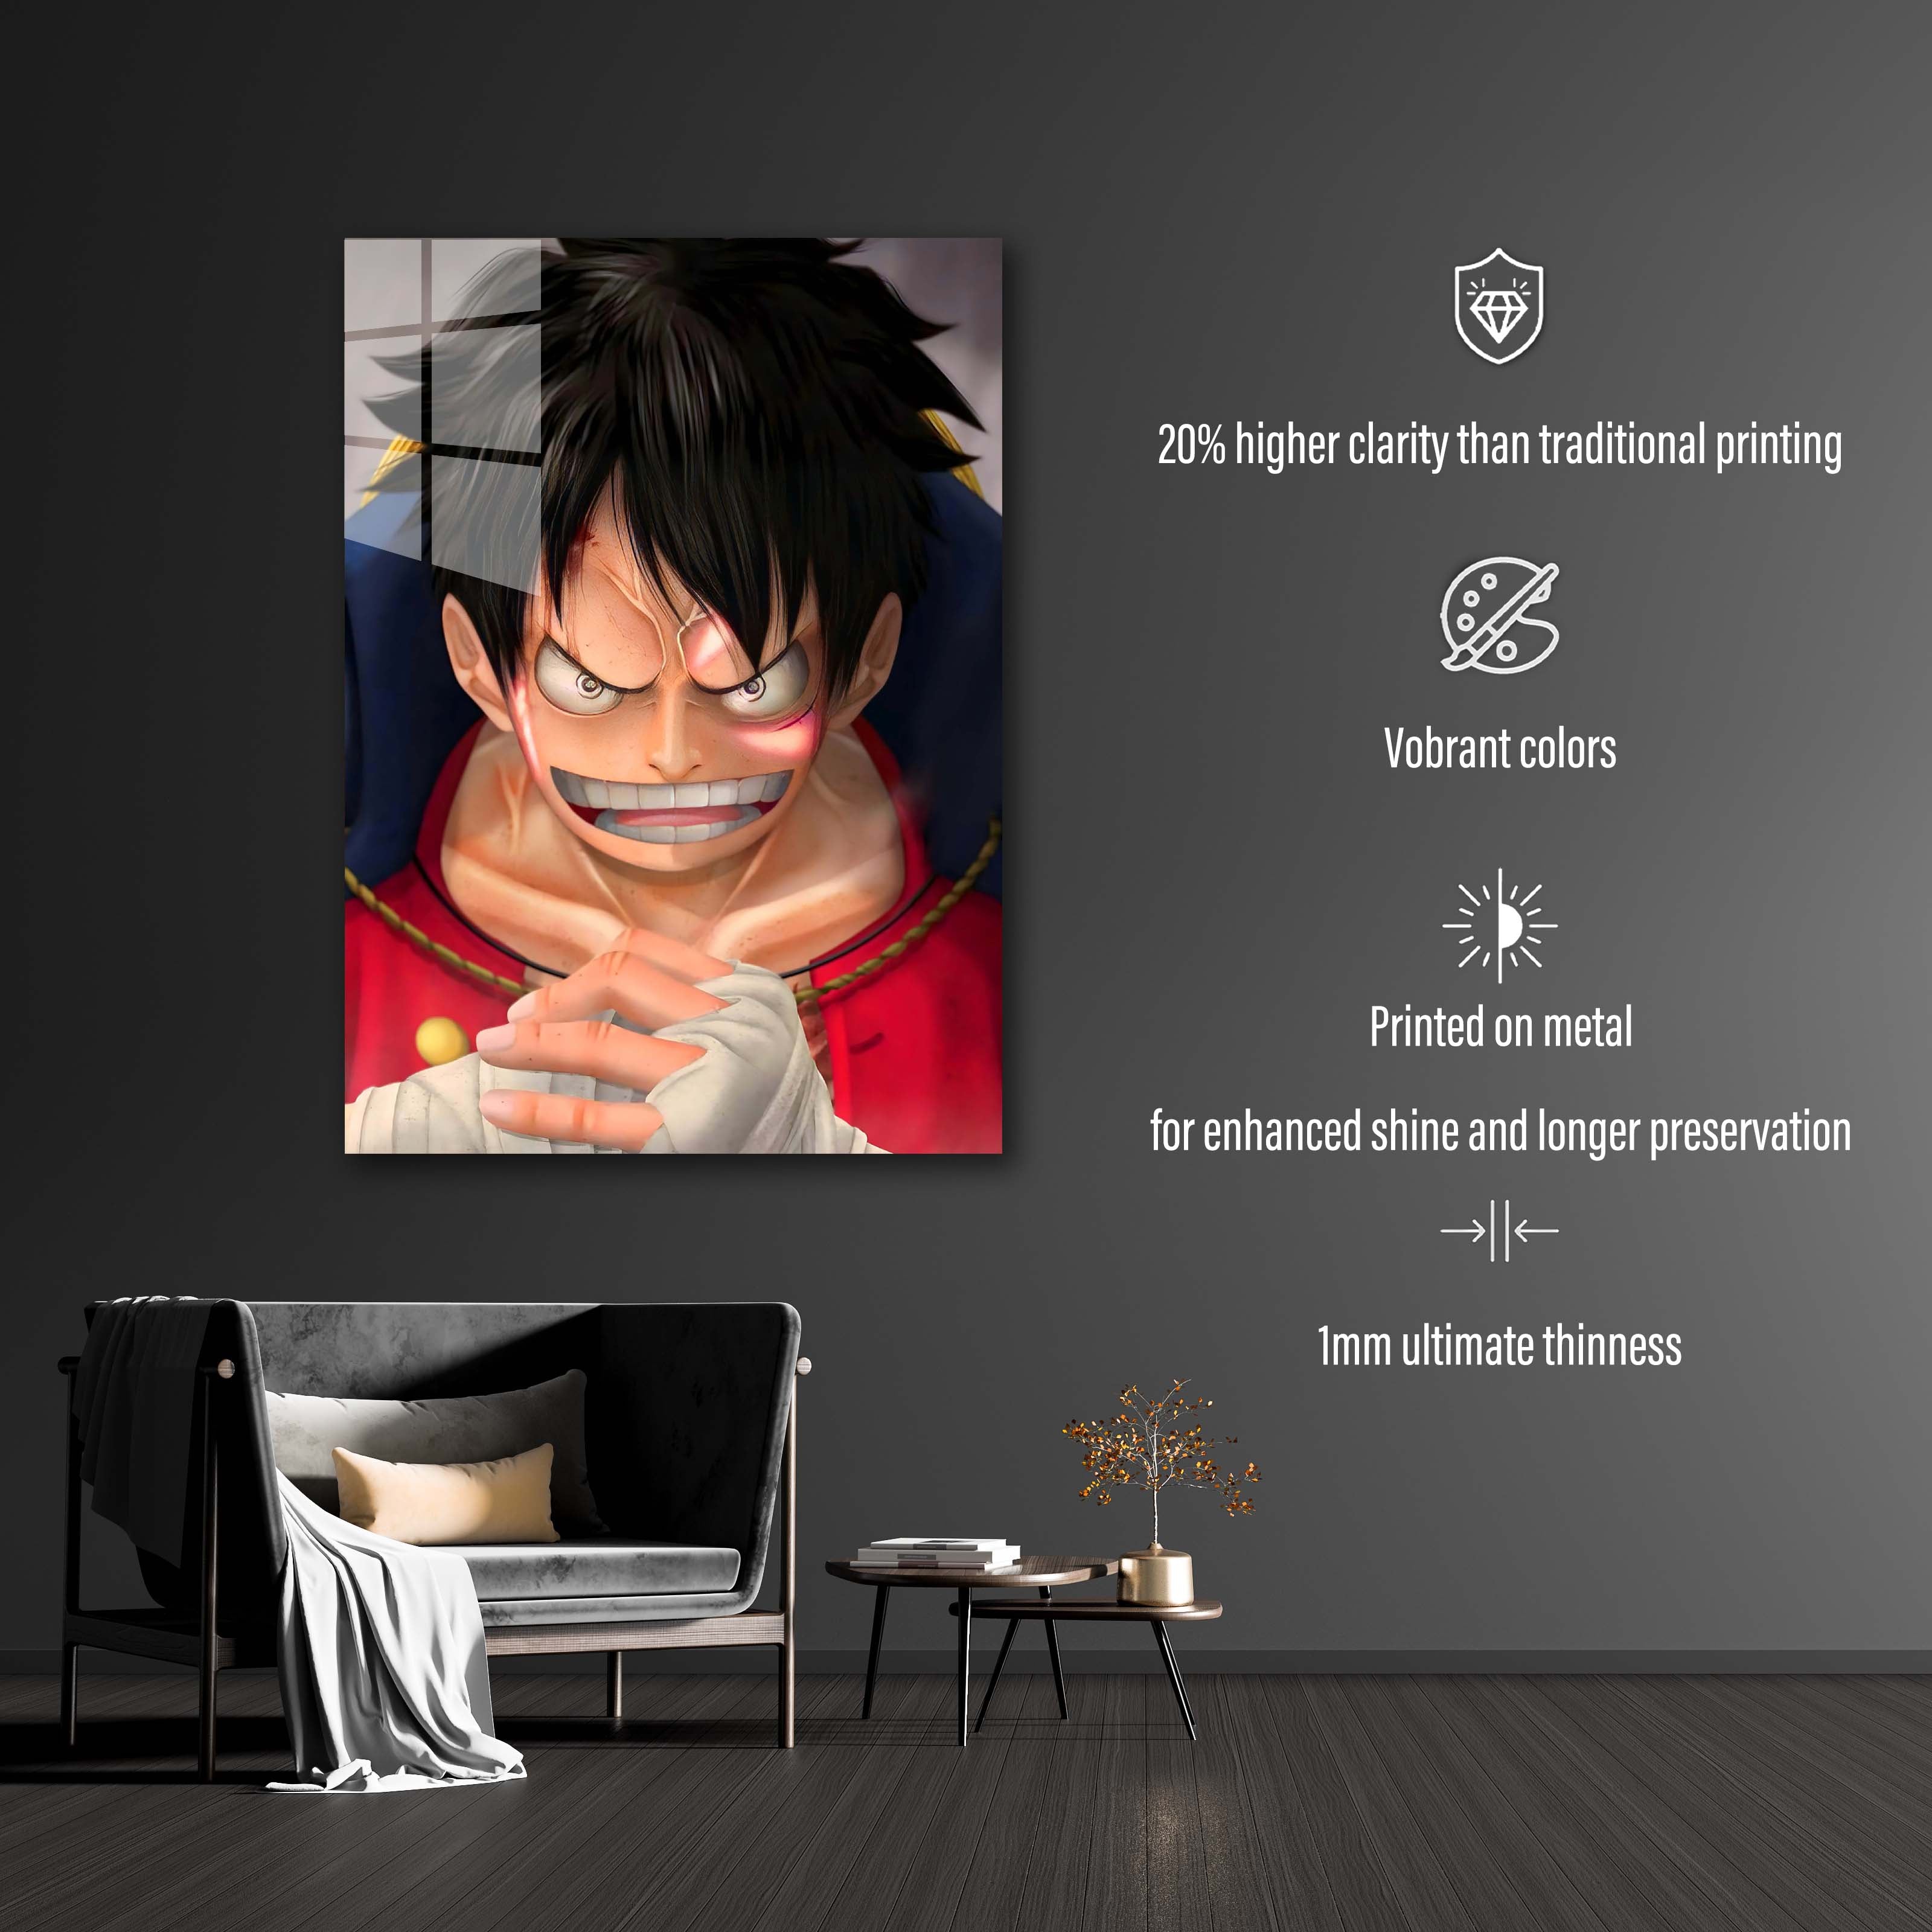 Captain Luffy-designed by @My Kido Art